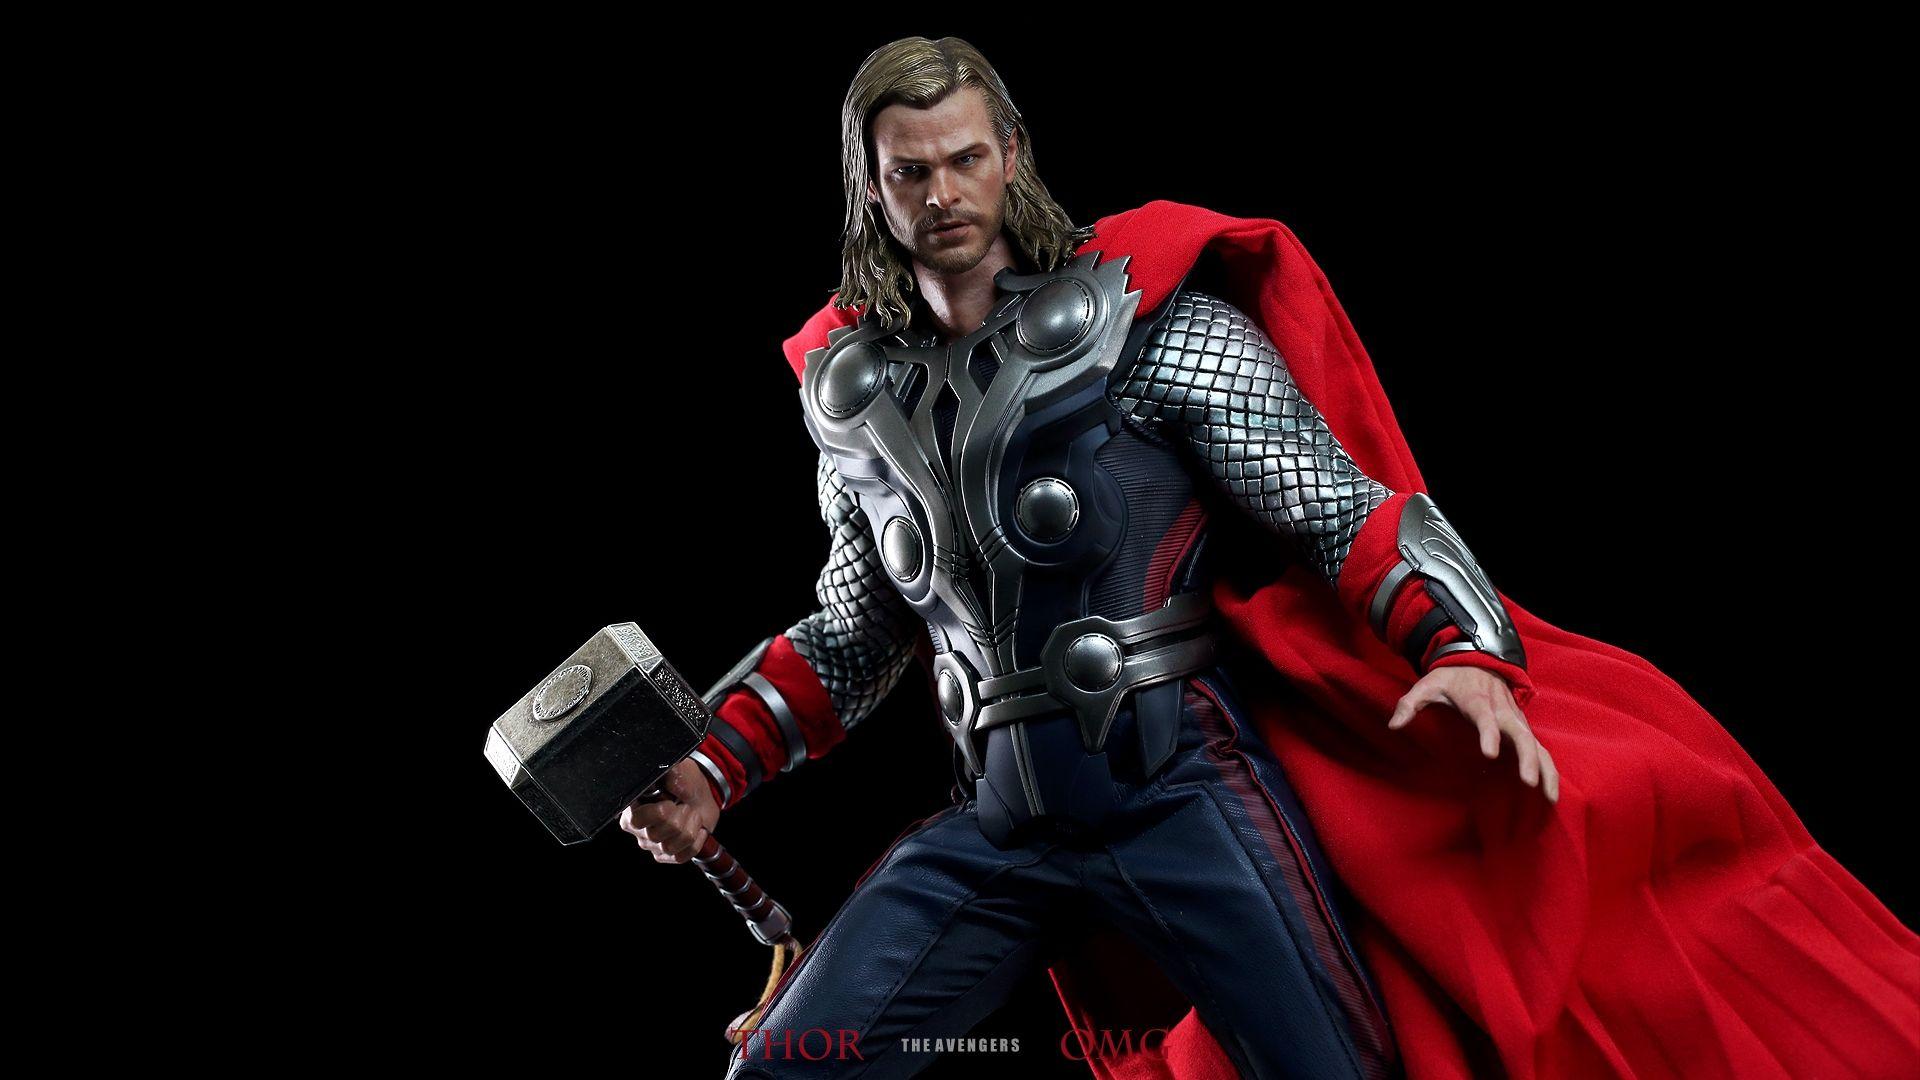 Featured image of post Thor Hd Wallpapers For Pc 1080P / 54 thor wallpapers for 1080p laptop full hd in 1920x1080 resolution, background,photos and images of thor for desktop windows 10, apple iphone we hope you enjoy our variety and growing collection of hd images to use as a background or home screen for your smartphone and computer.